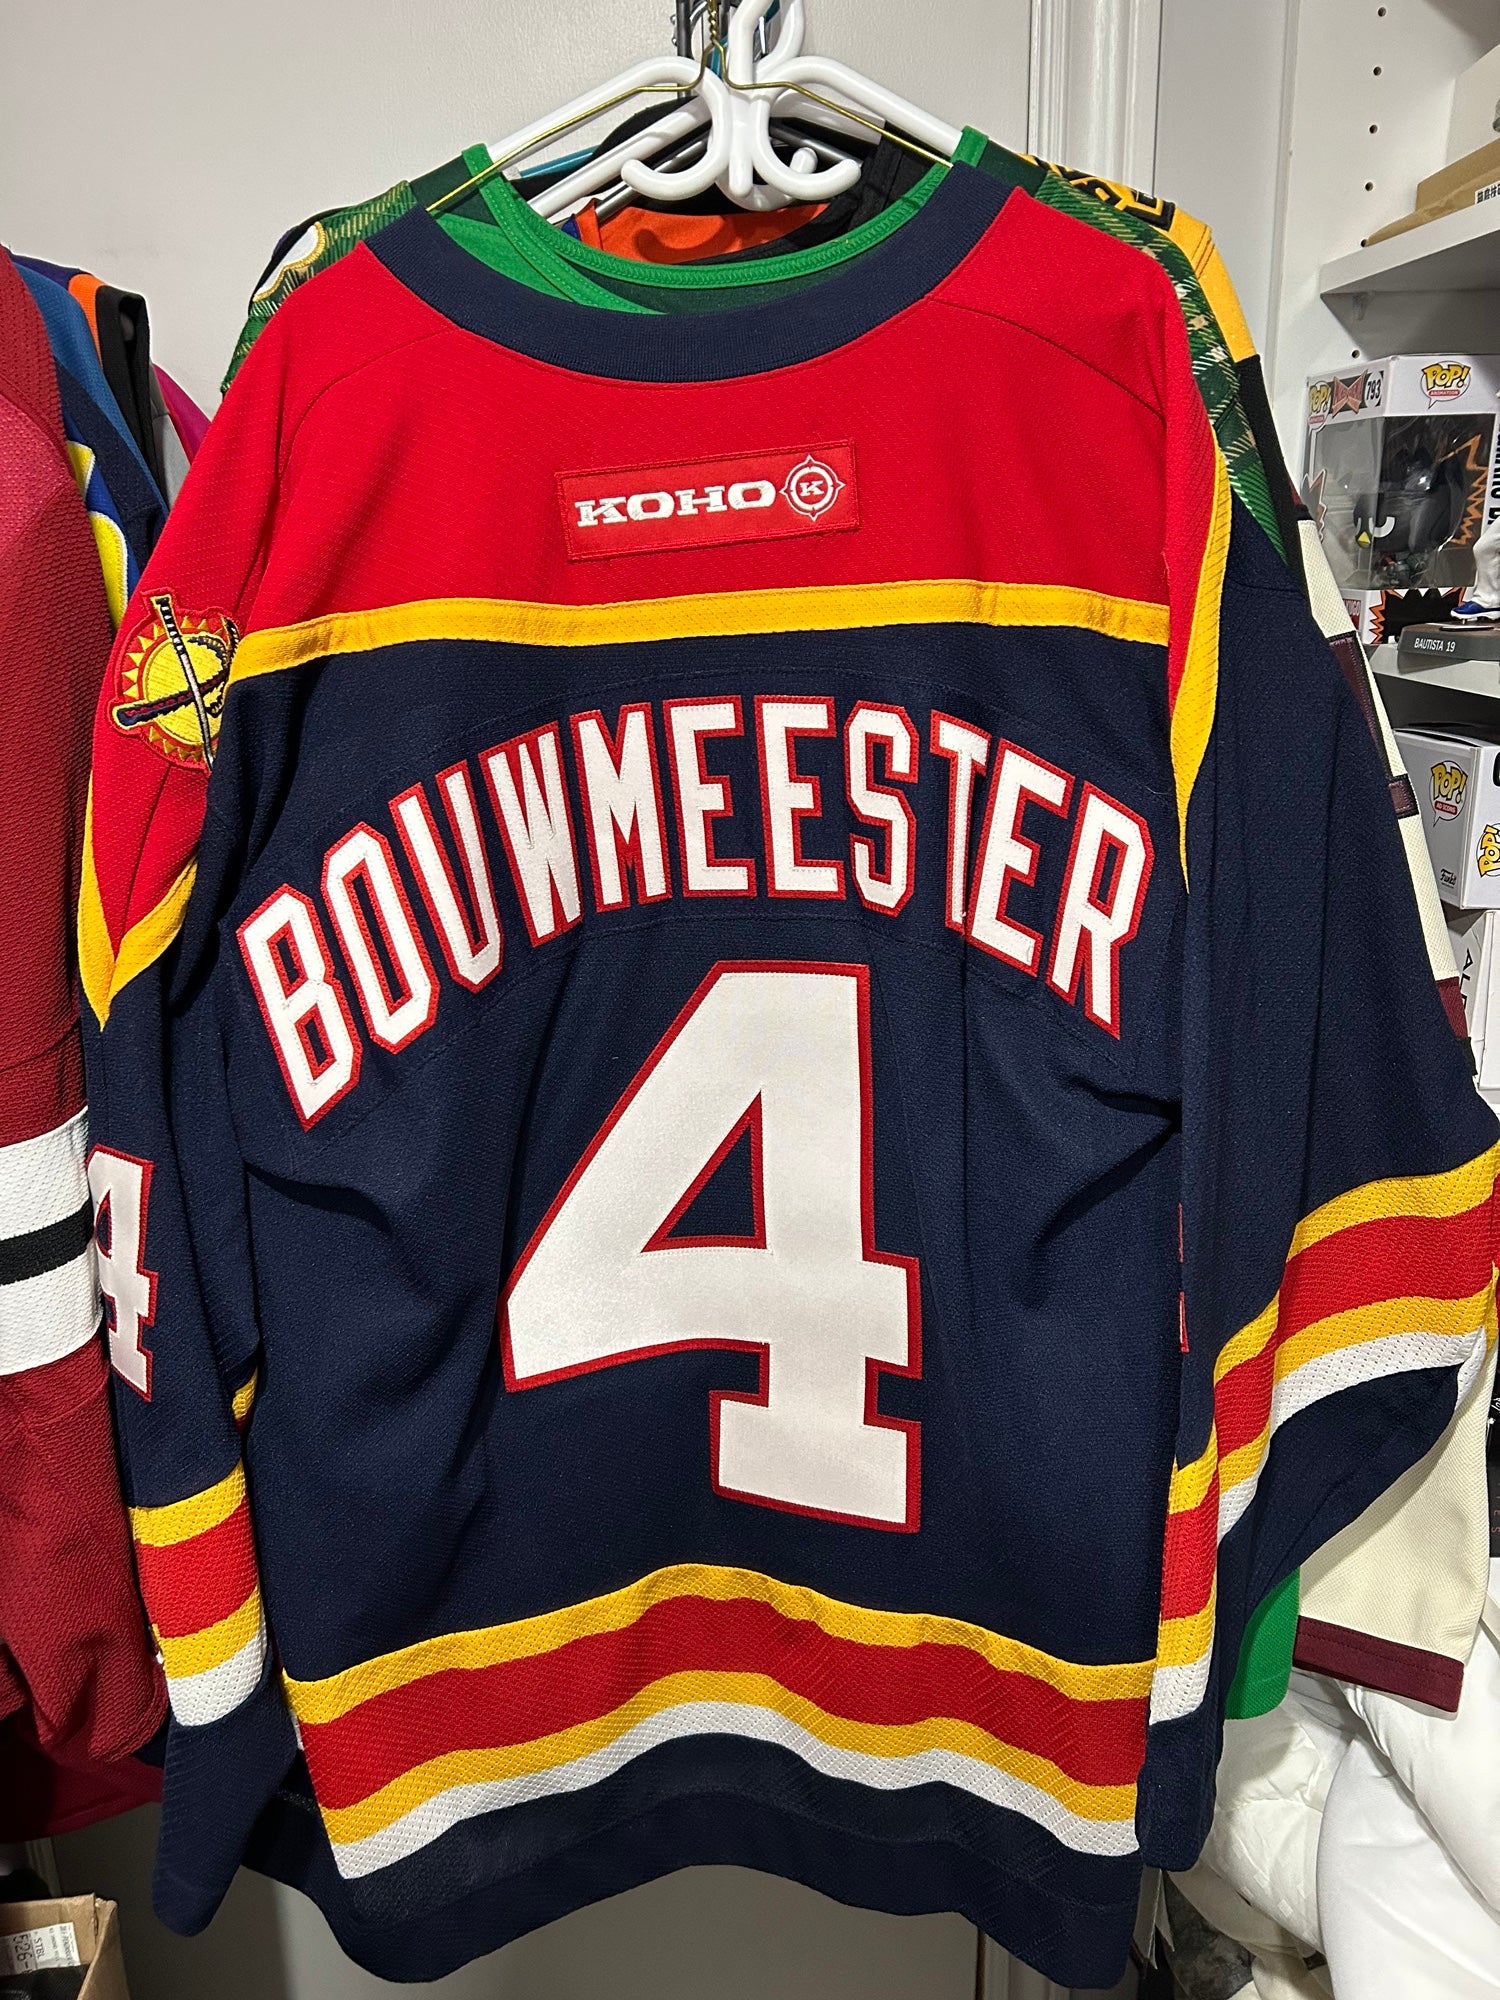 2002-03 Jay Bouwmeester Florida Panthers Game Worn Jersey - Rookie